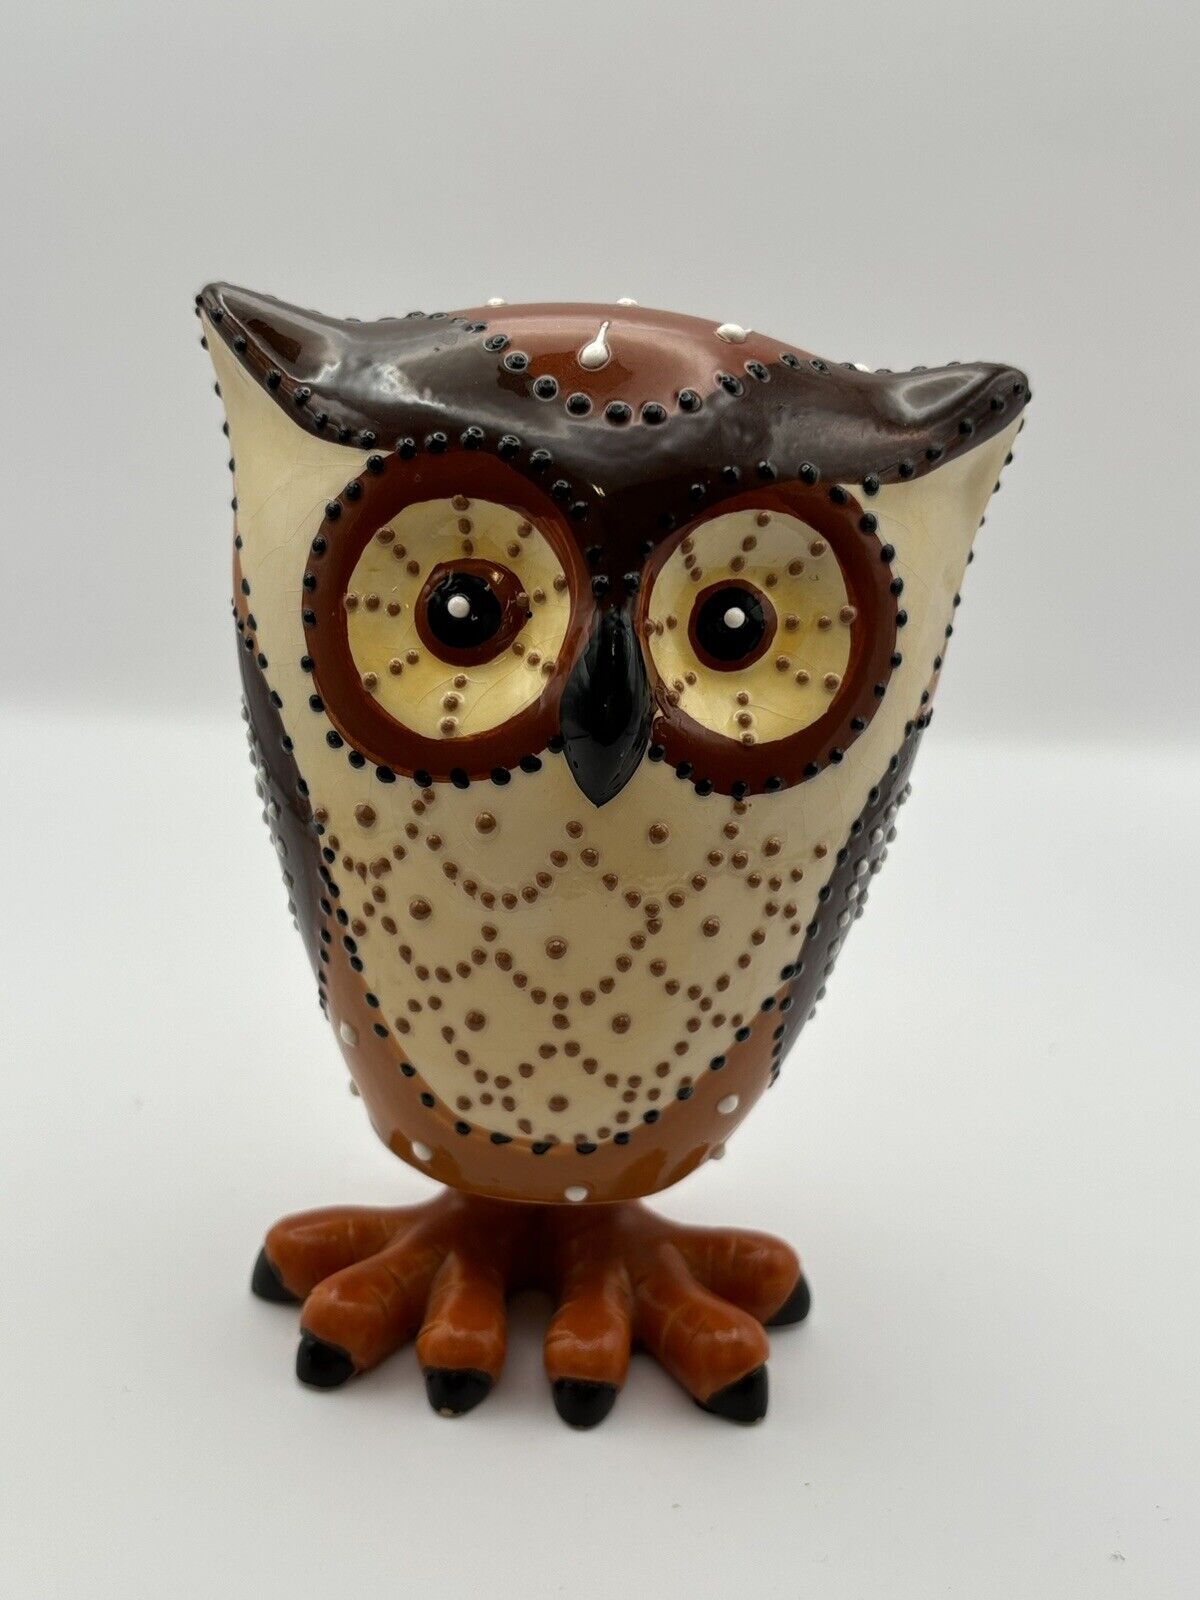 Vintage Ceramic Owl Hand Painted Large Brown Bobble Head Figurine collectible